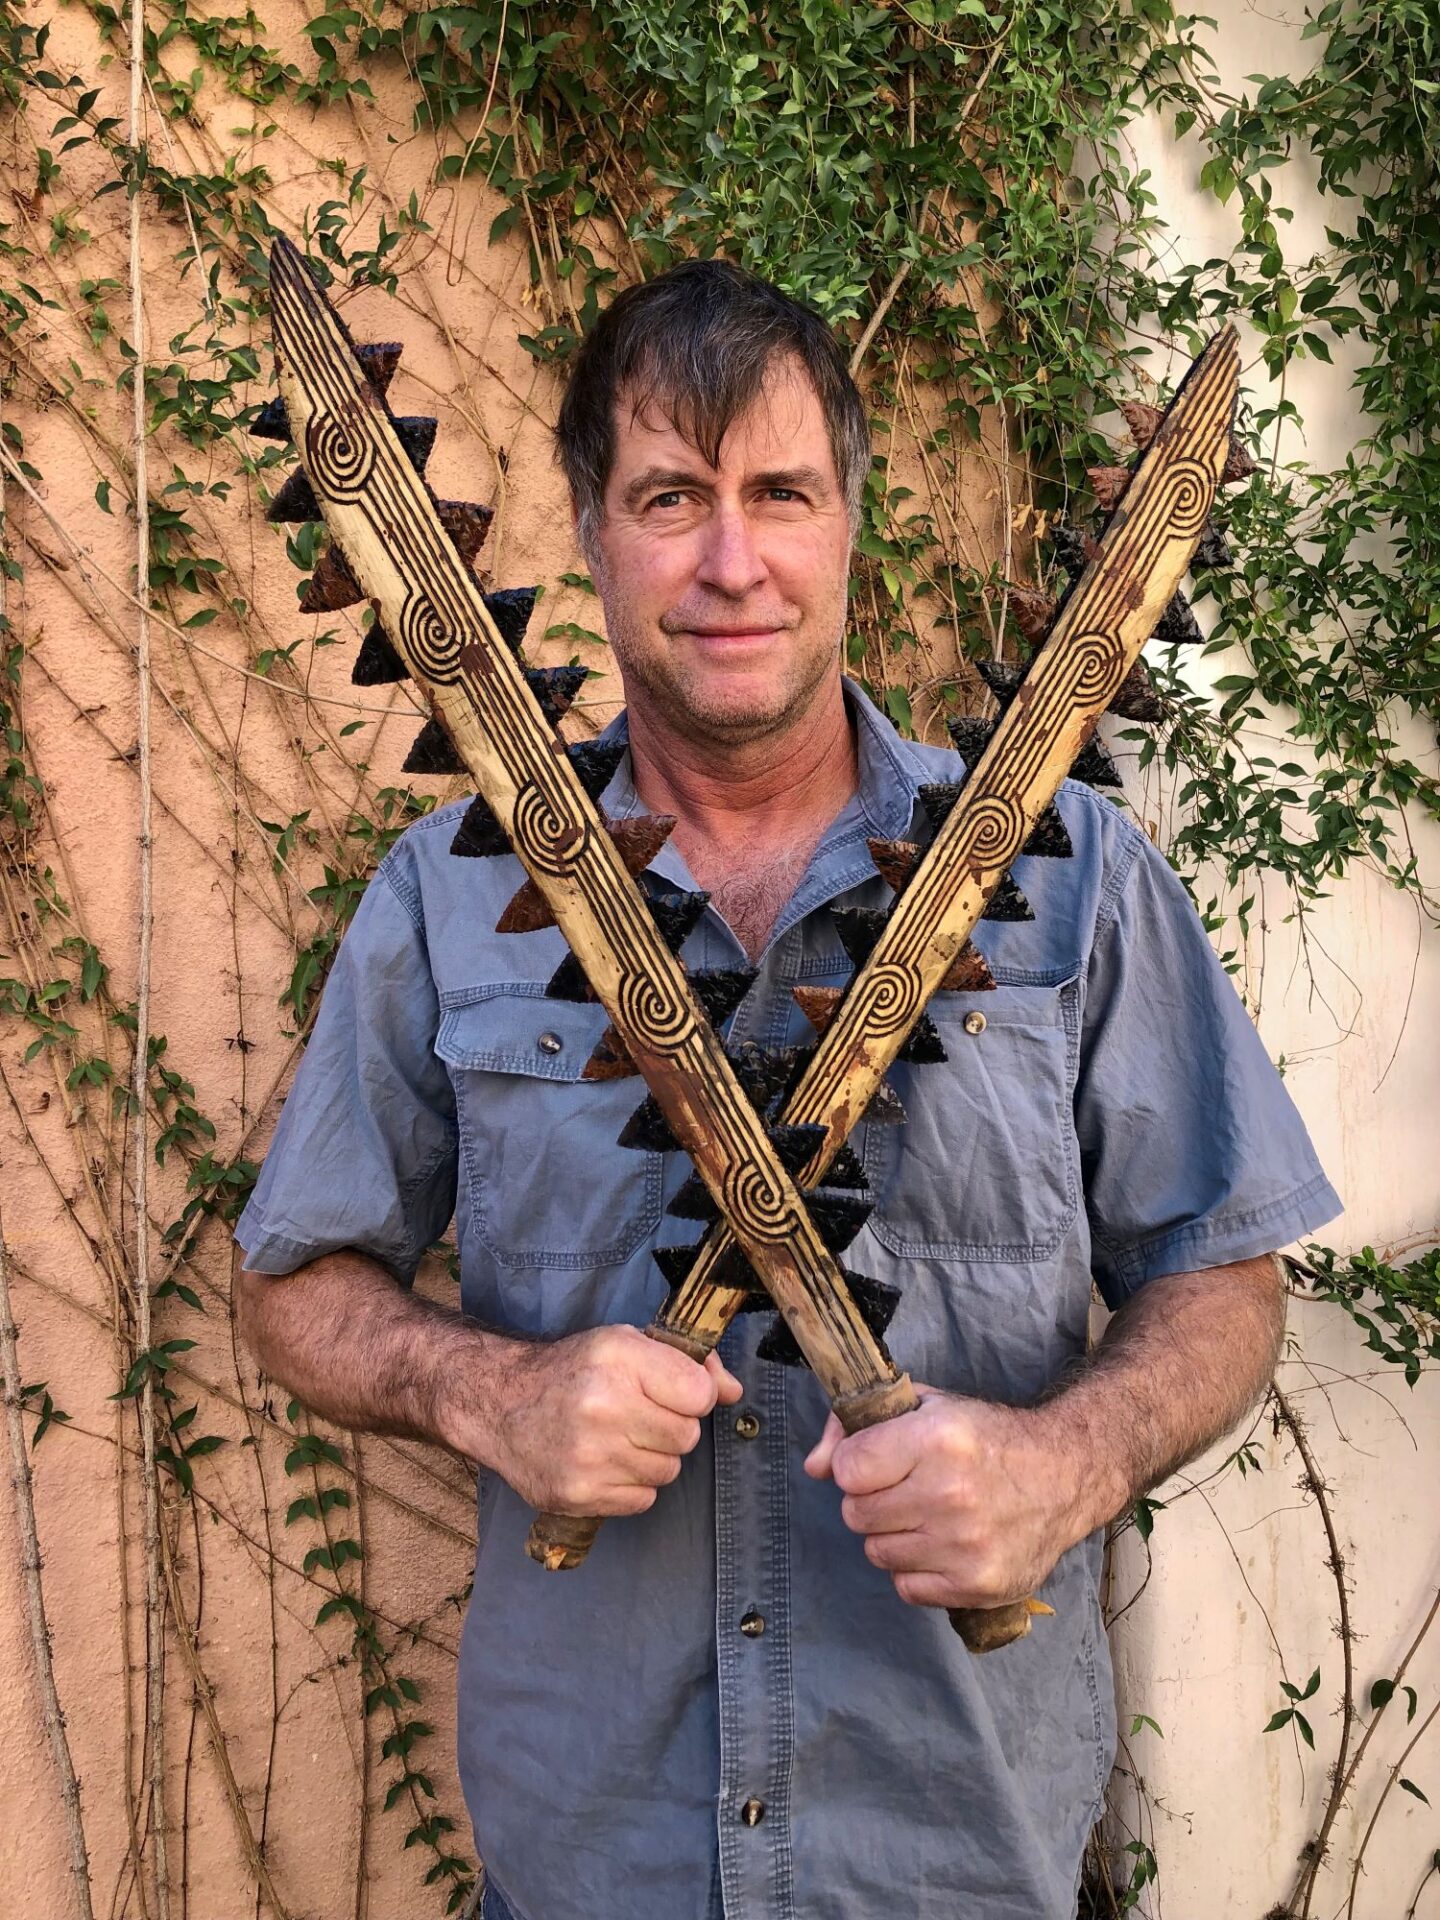 Me with the swords to show scale.